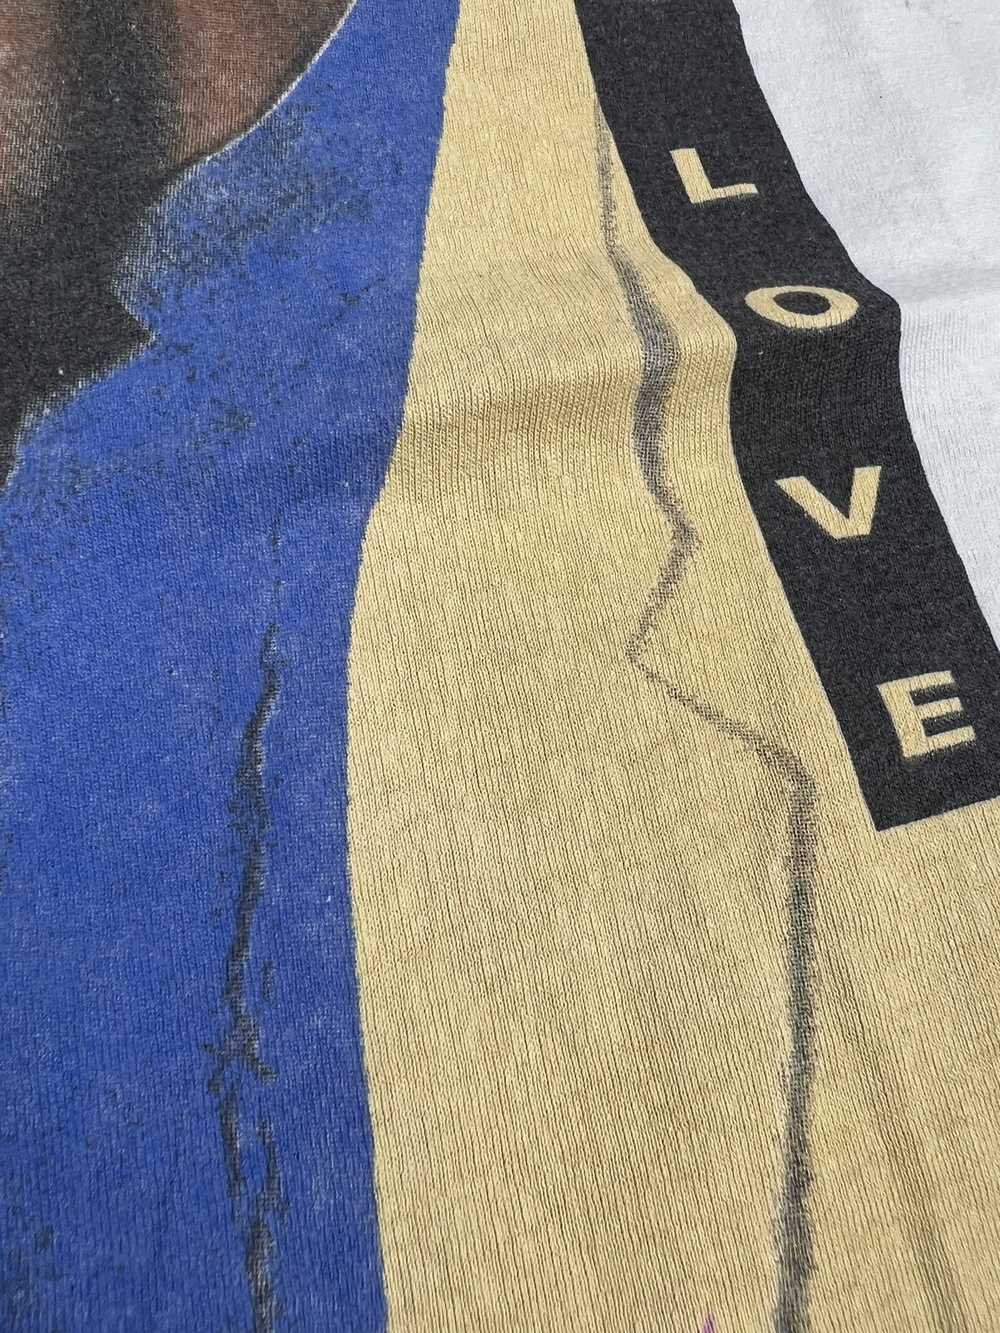 Band Tees × Vintage Vtg 90s Luther Vandross Power… - image 7